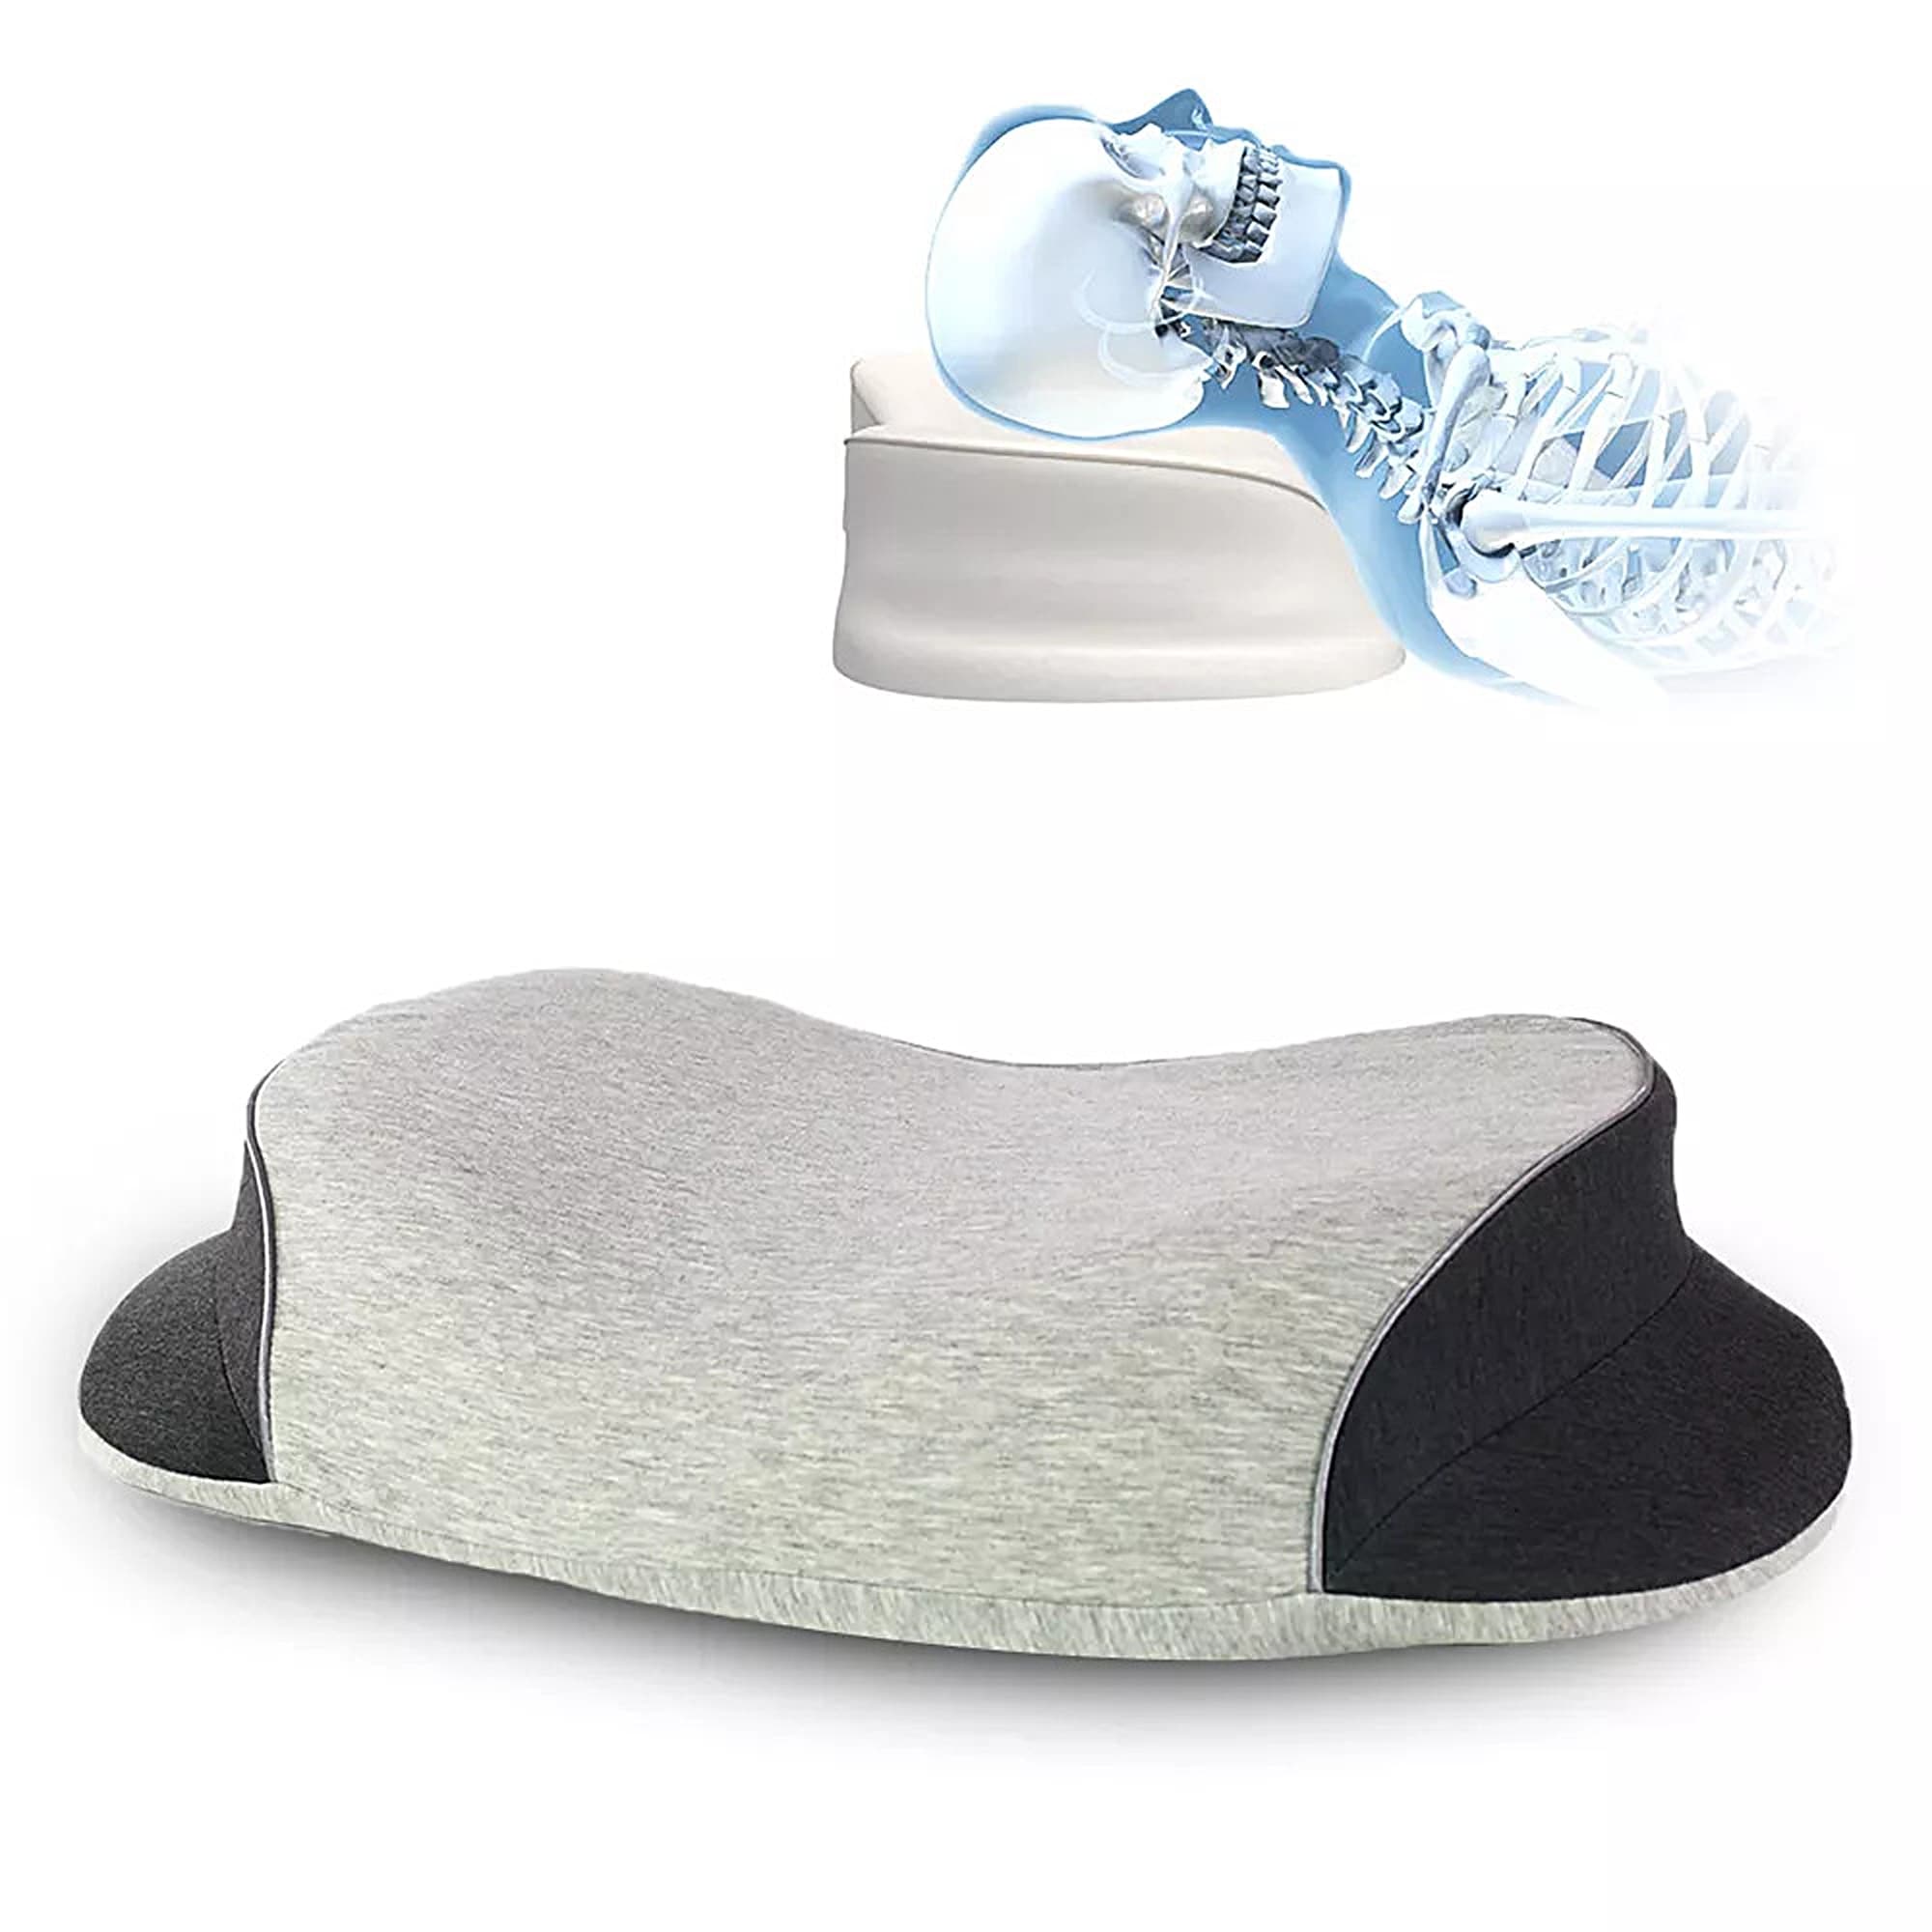 https://ak1.ostkcdn.com/images/products/is/images/direct/aa1a16a1c62d58296e040bef875d5af47e747ec8/Ortho-pain-relief-pillow.jpg